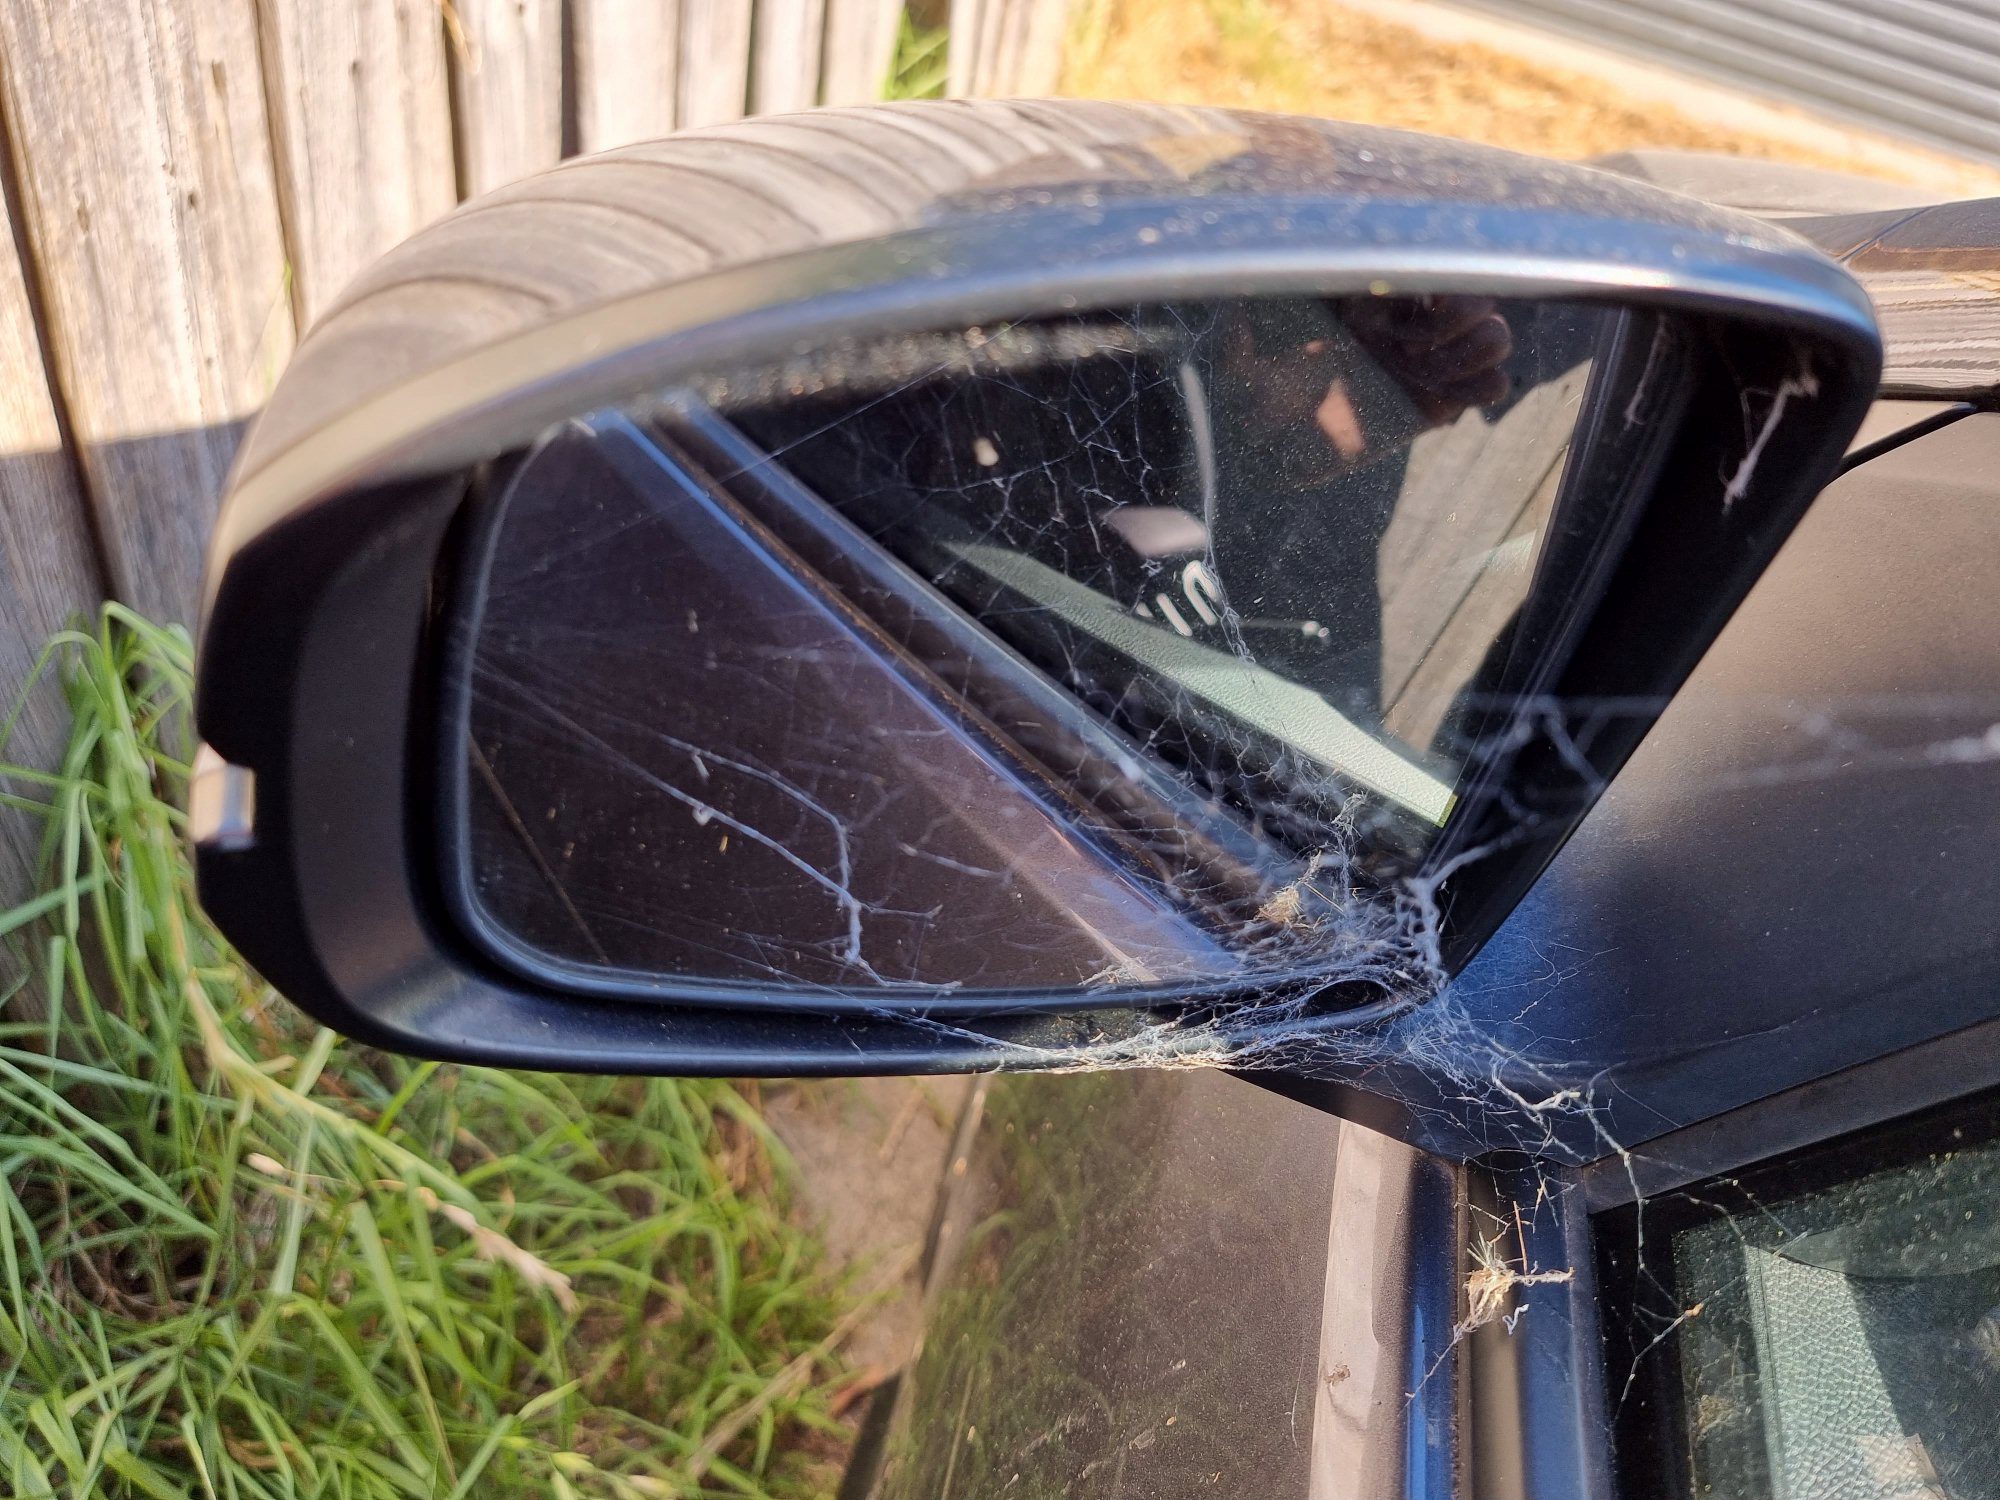 How to Stop Spider Webs on Car Mirrors